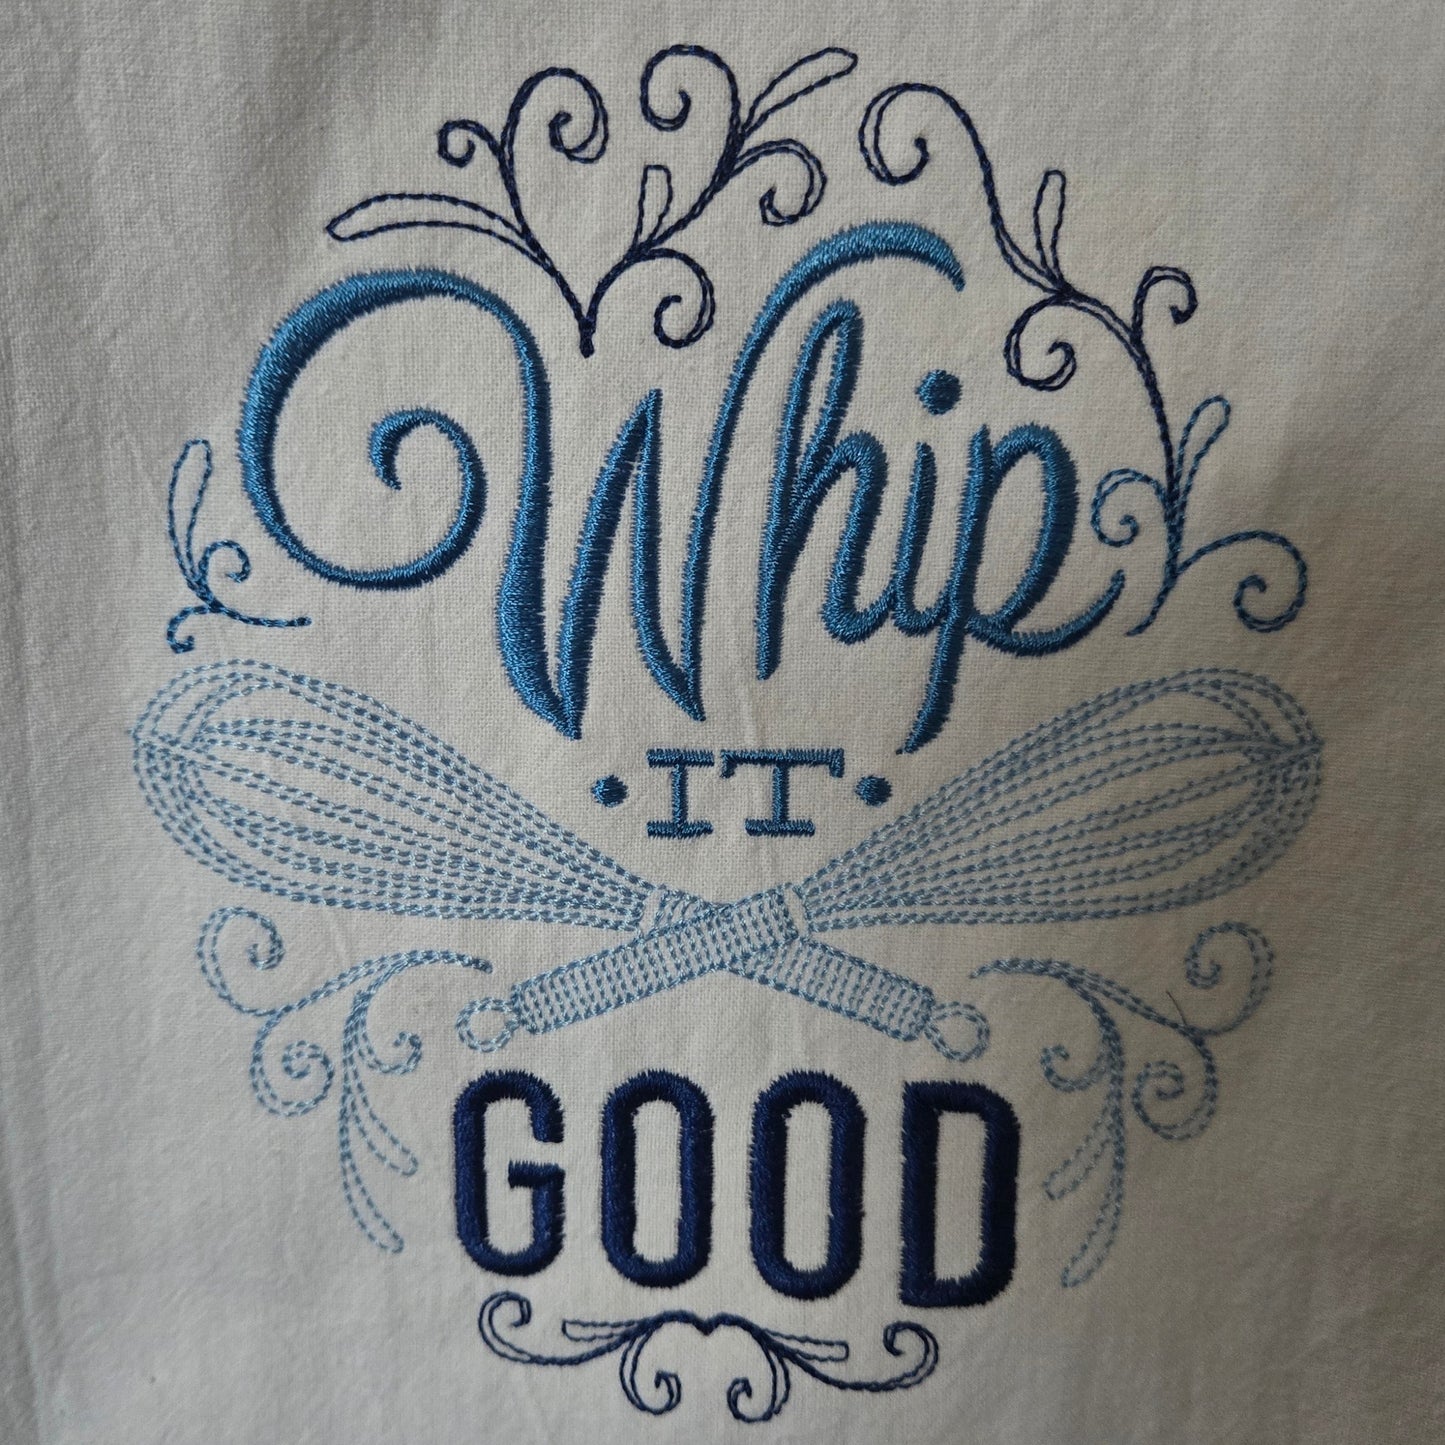 Whip It Good - Kitchen Outlines (Embroidered CYO)